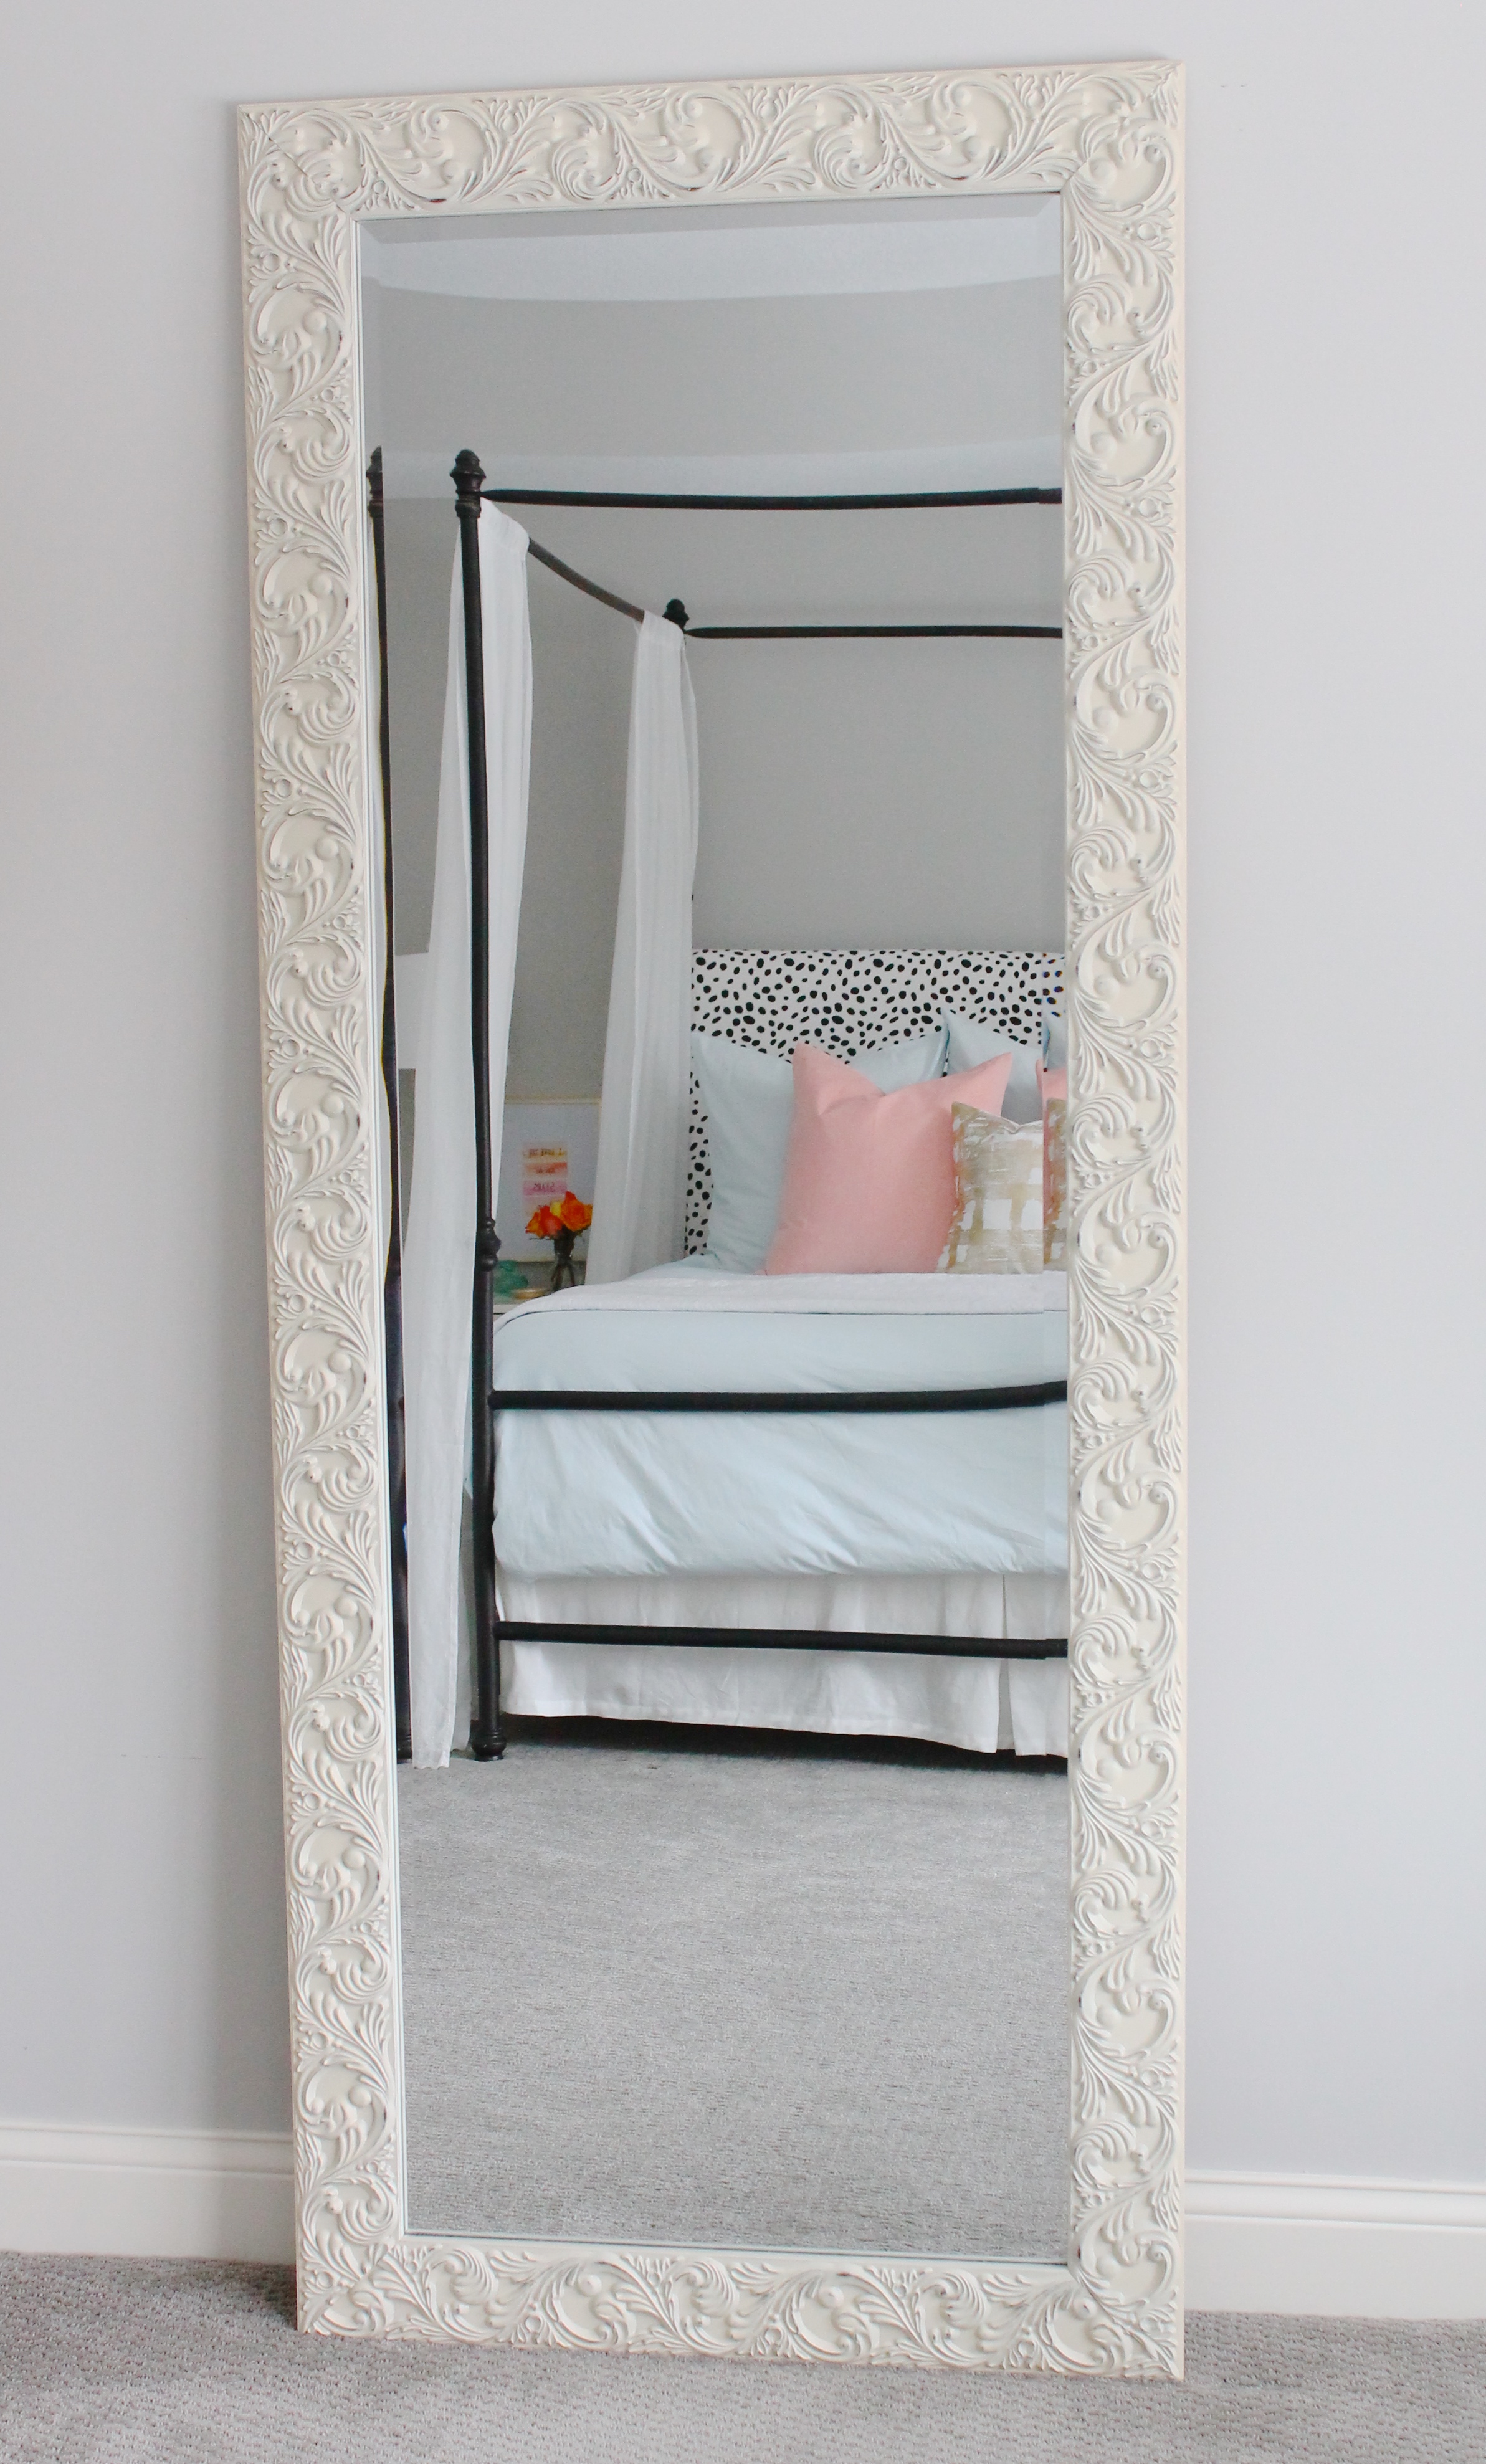 Lovely master bedroom with leaner mirror, pink and blue bedding and a dalmatian headboard.